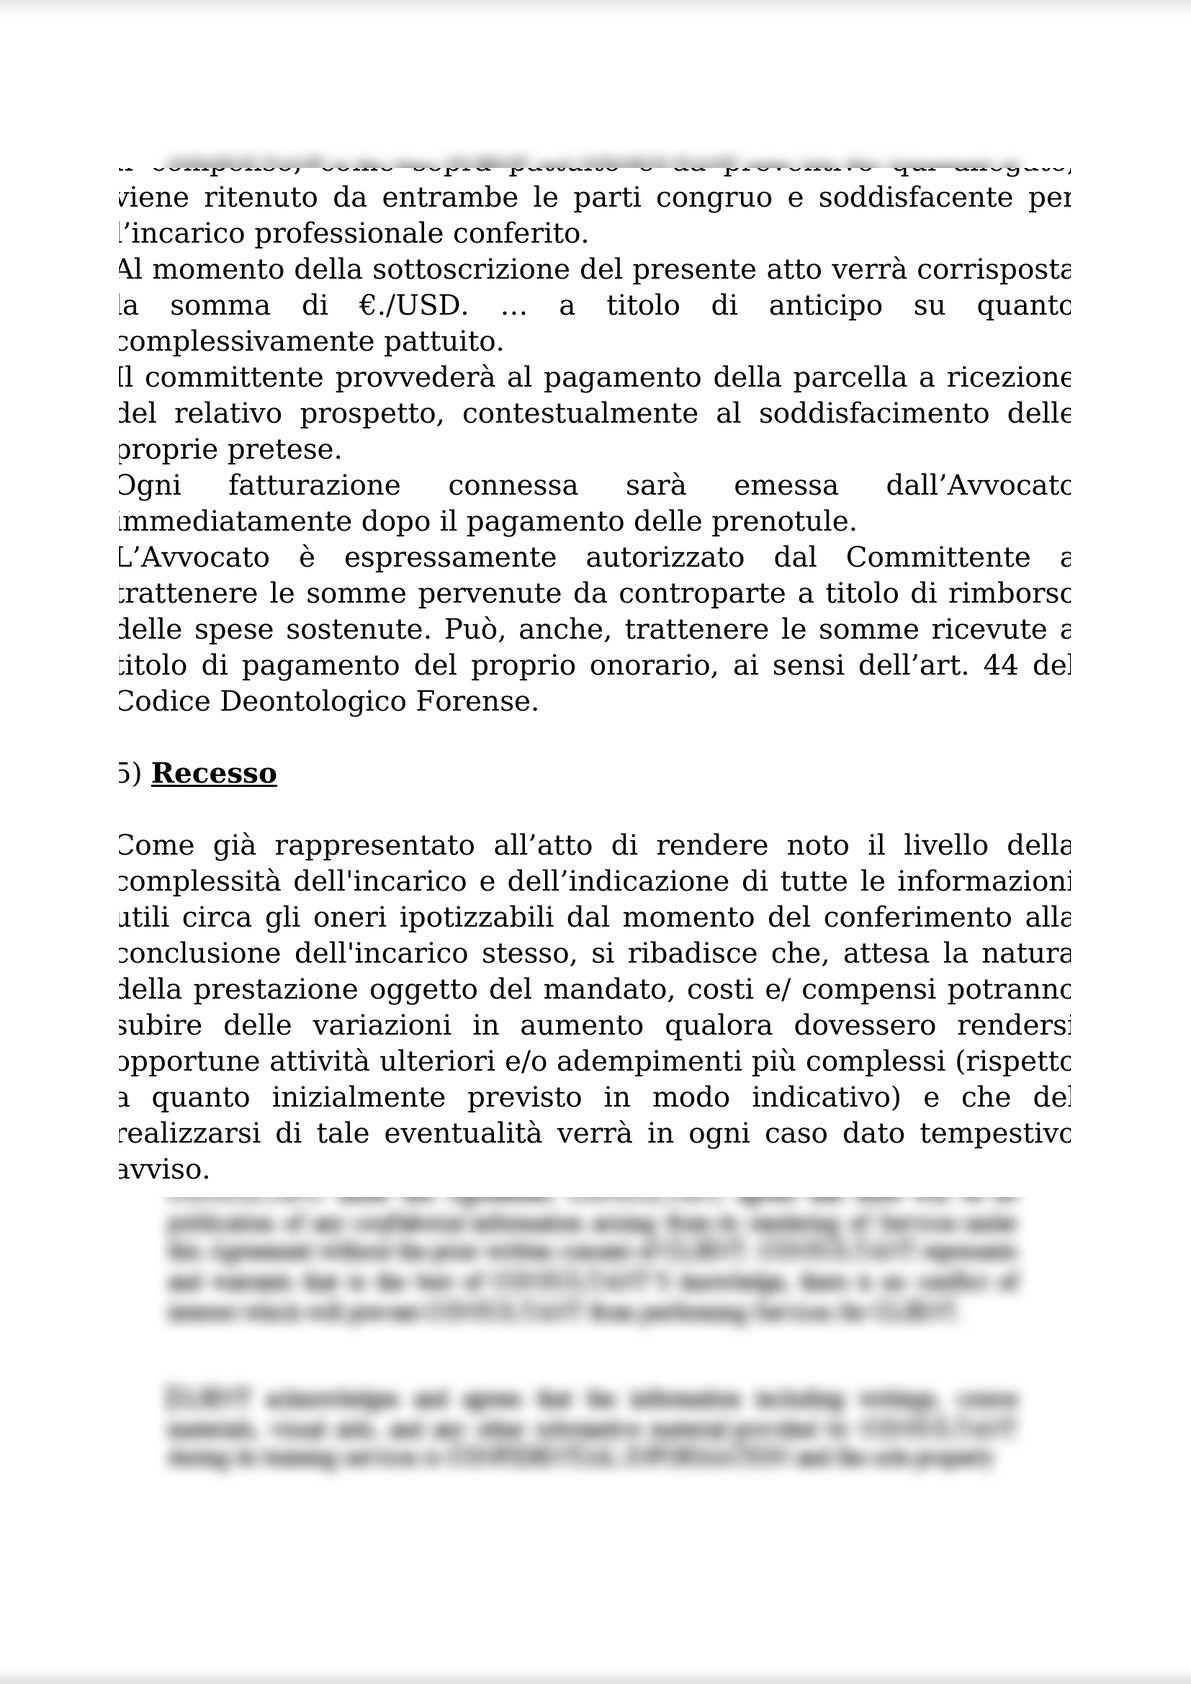 INTELLECTUAL WORK AGREEMENT FOR OUT-OF-COURT ACTIVITIES AND ATTACHMENTS 1 (PRIVACY); 2 (ANTI-MONEY LAUNDERING); AND 3 FEE QUOTE / CONTRATTO D’OPERA INTELLETTUALE STRAGIUDIZIALE-5